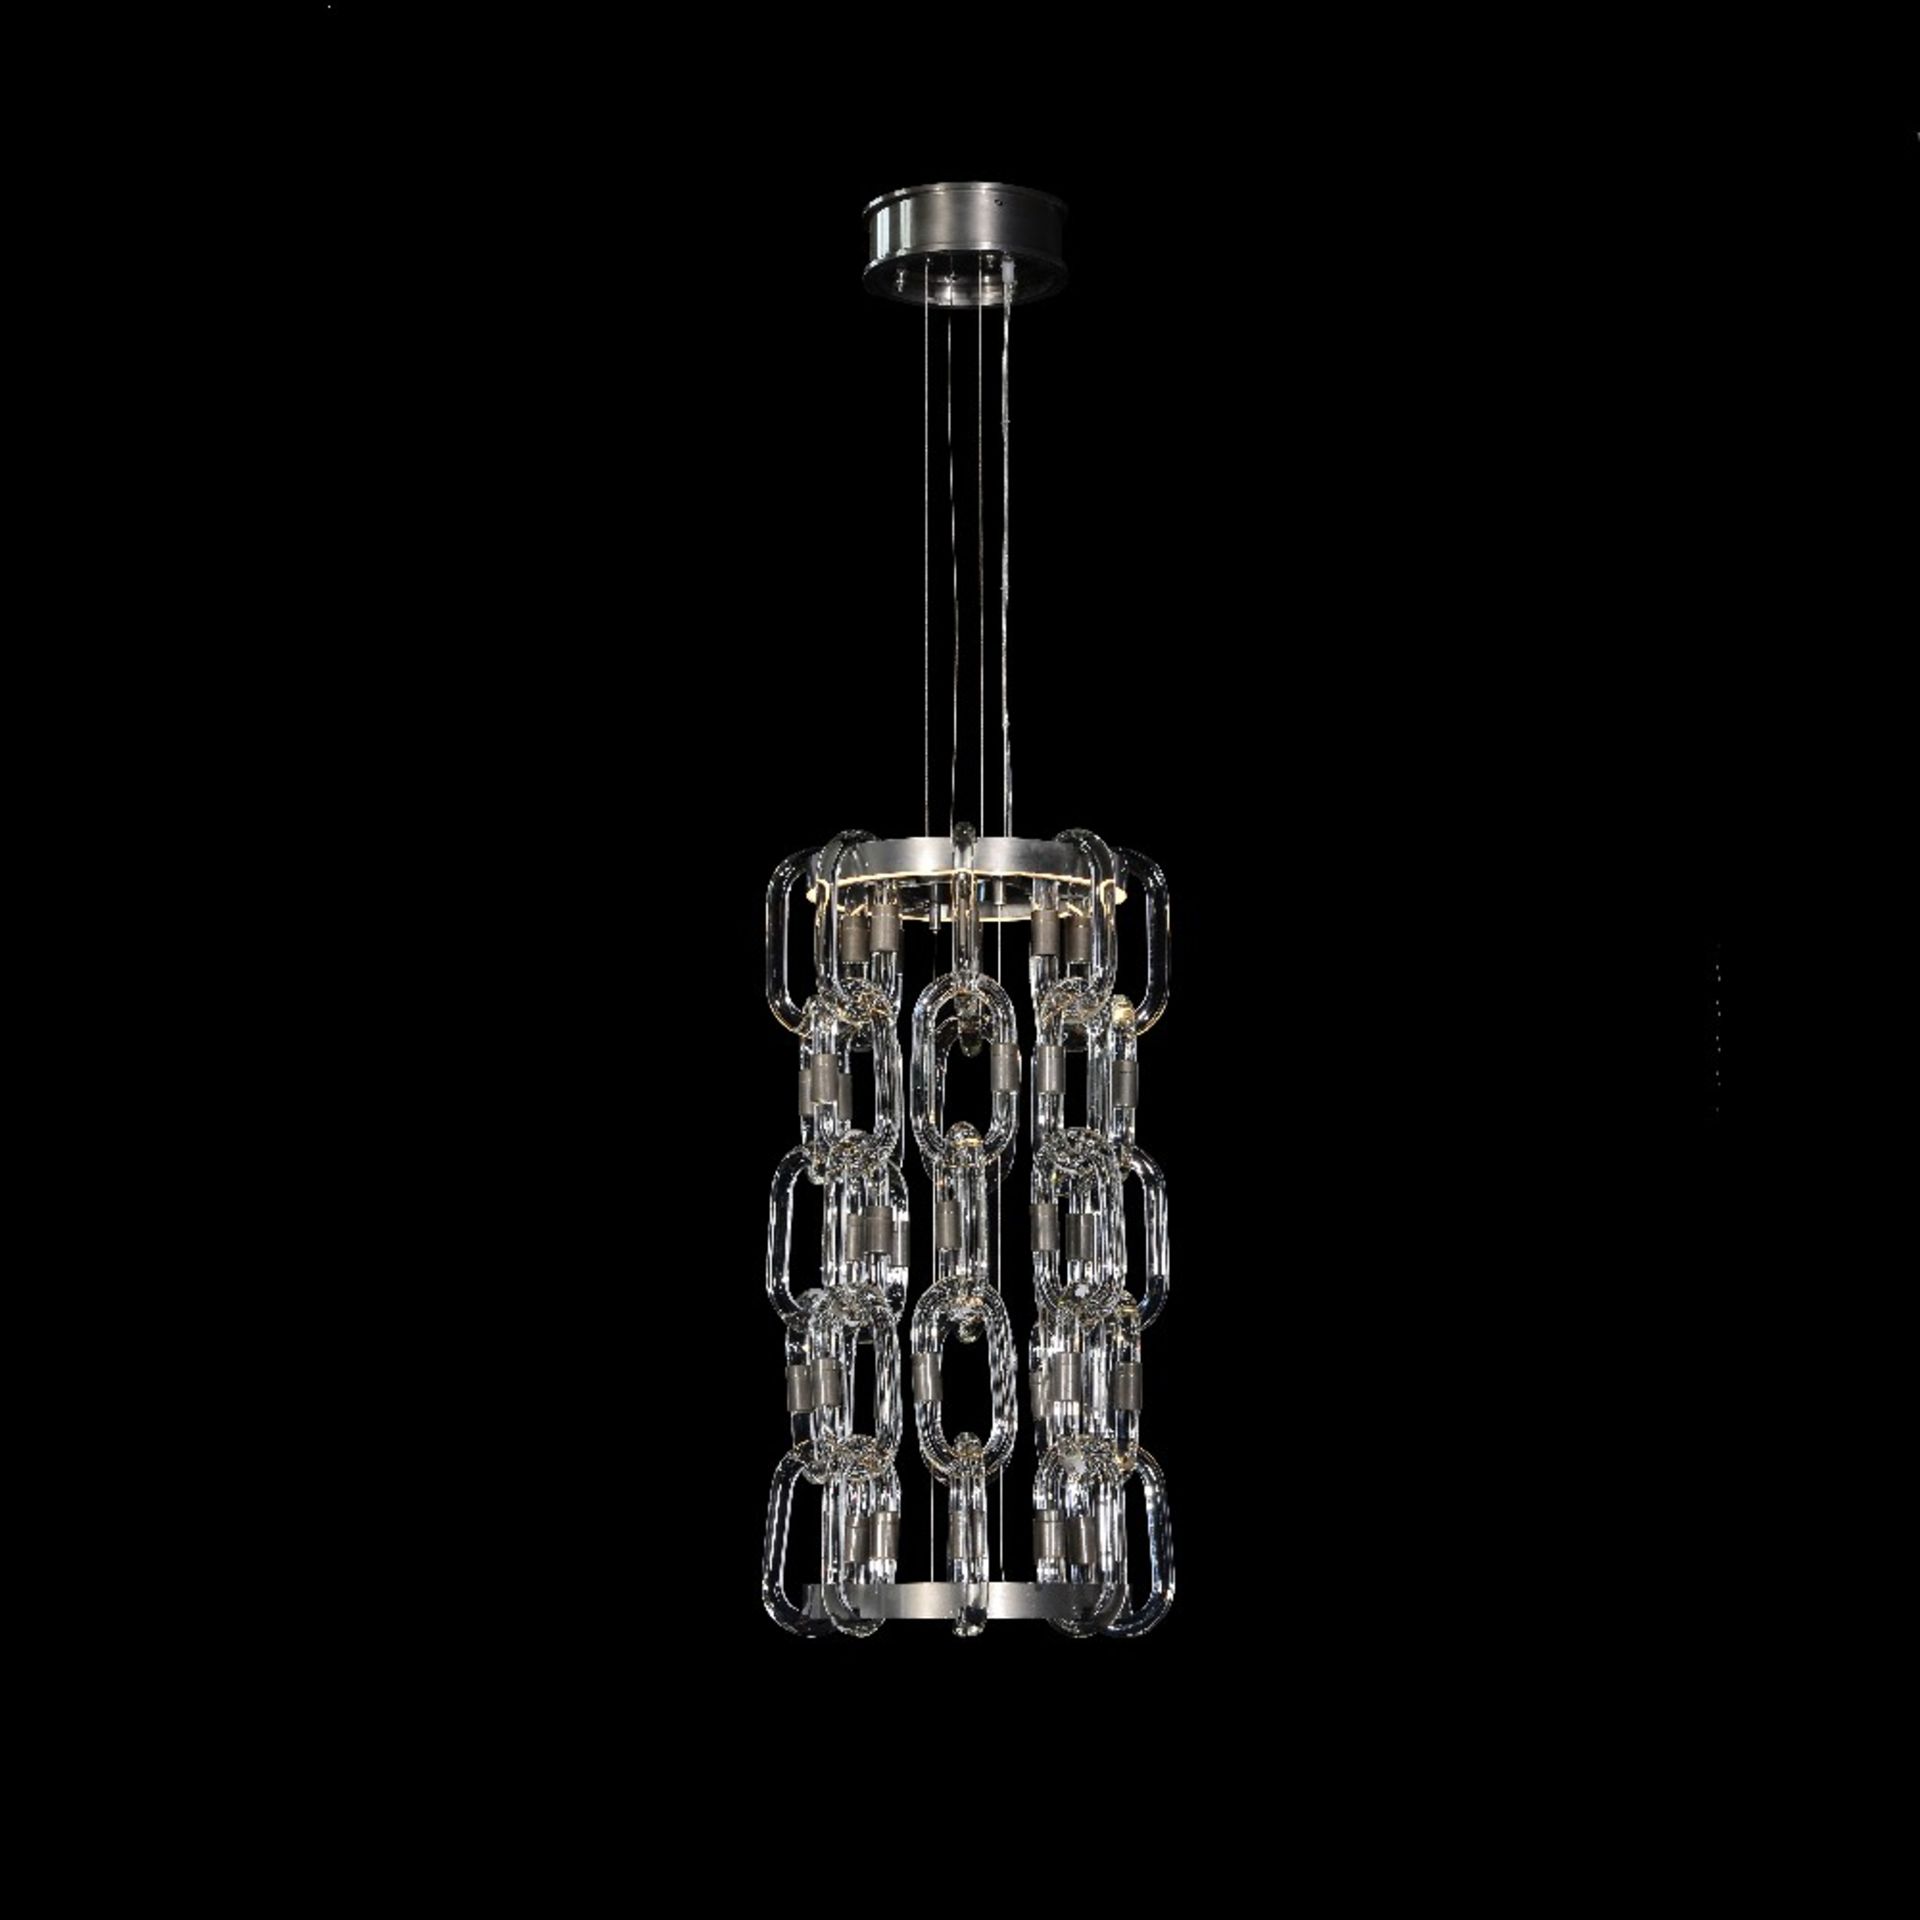 Crystal chain pendant Visually strong yet delicate, this contemporary statement pendant is fashioned